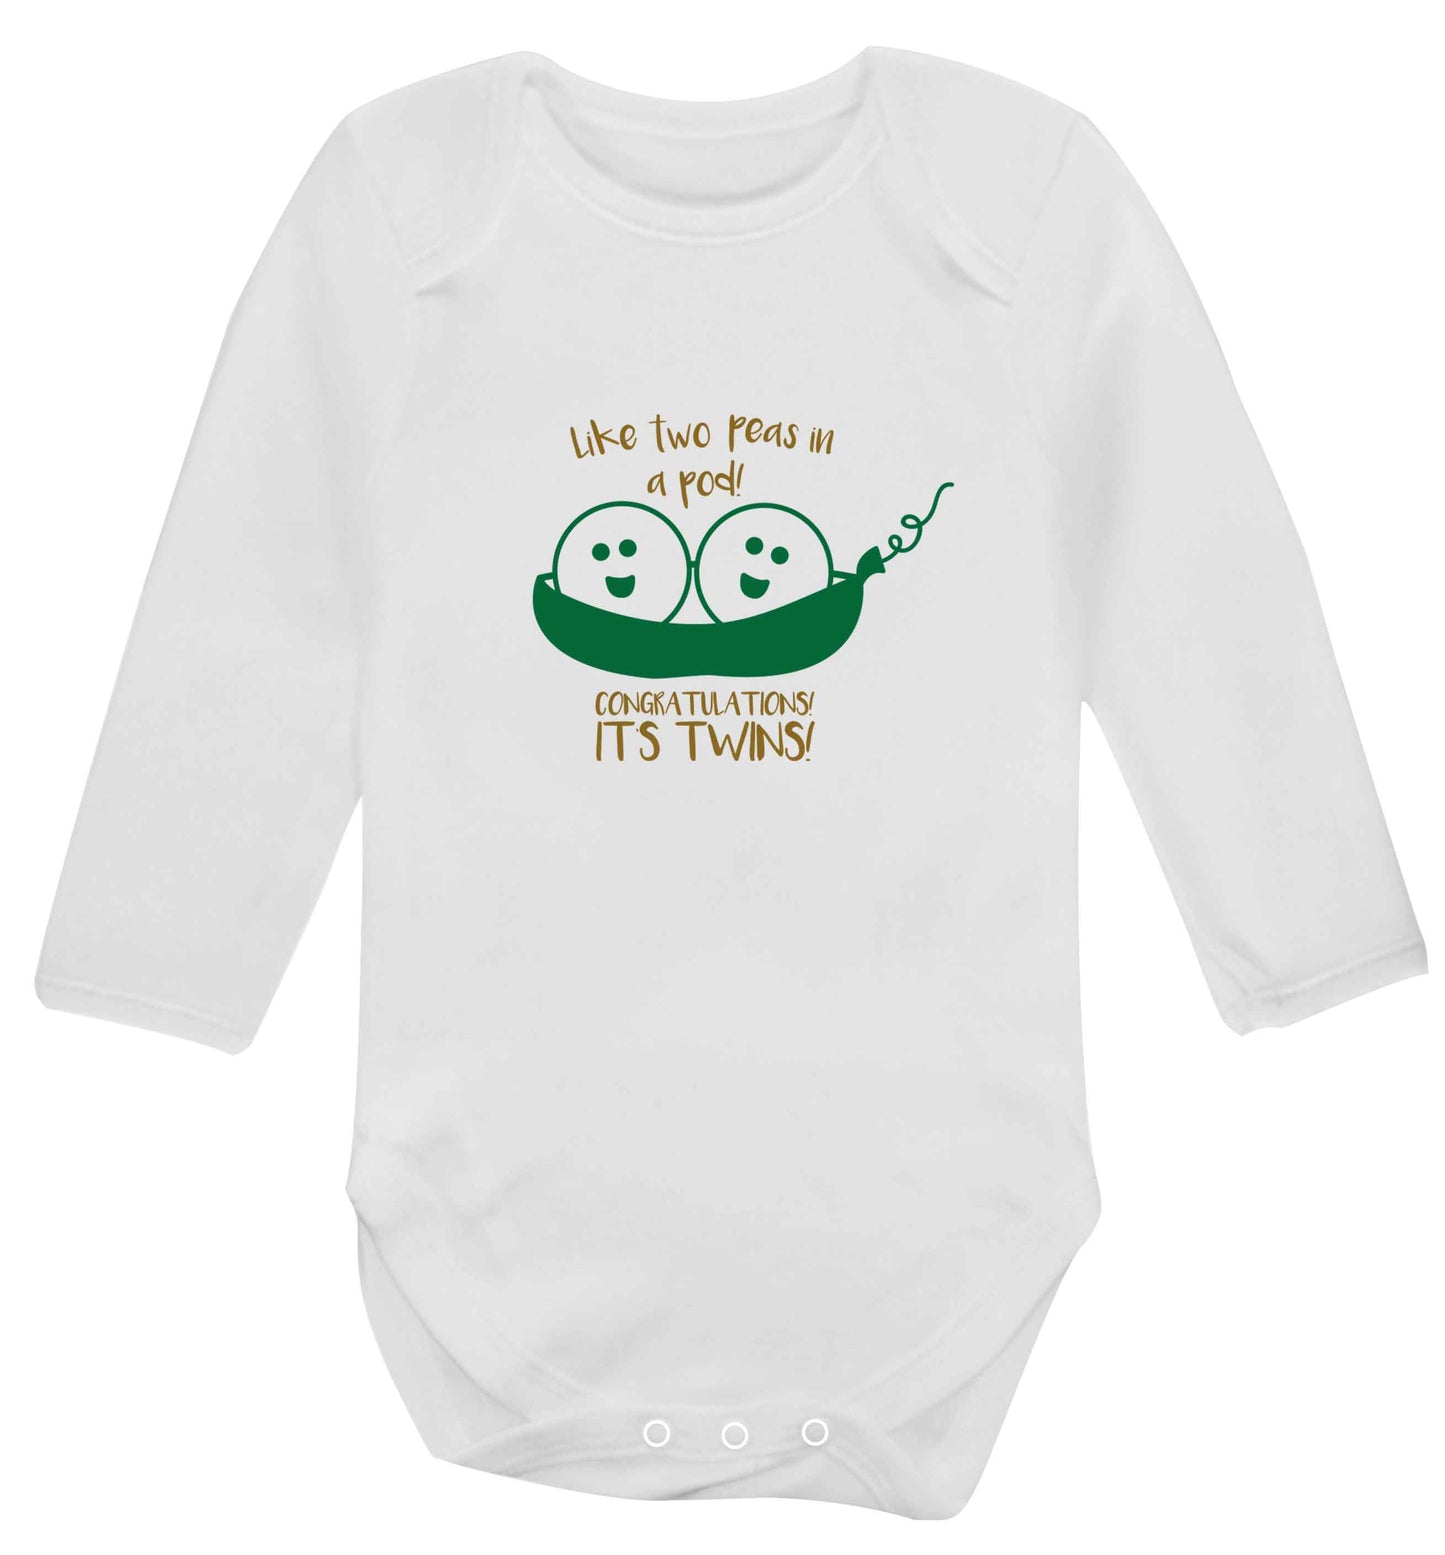 Like two peas in a pod! Congratulations it's twins! baby vest long sleeved white 6-12 months